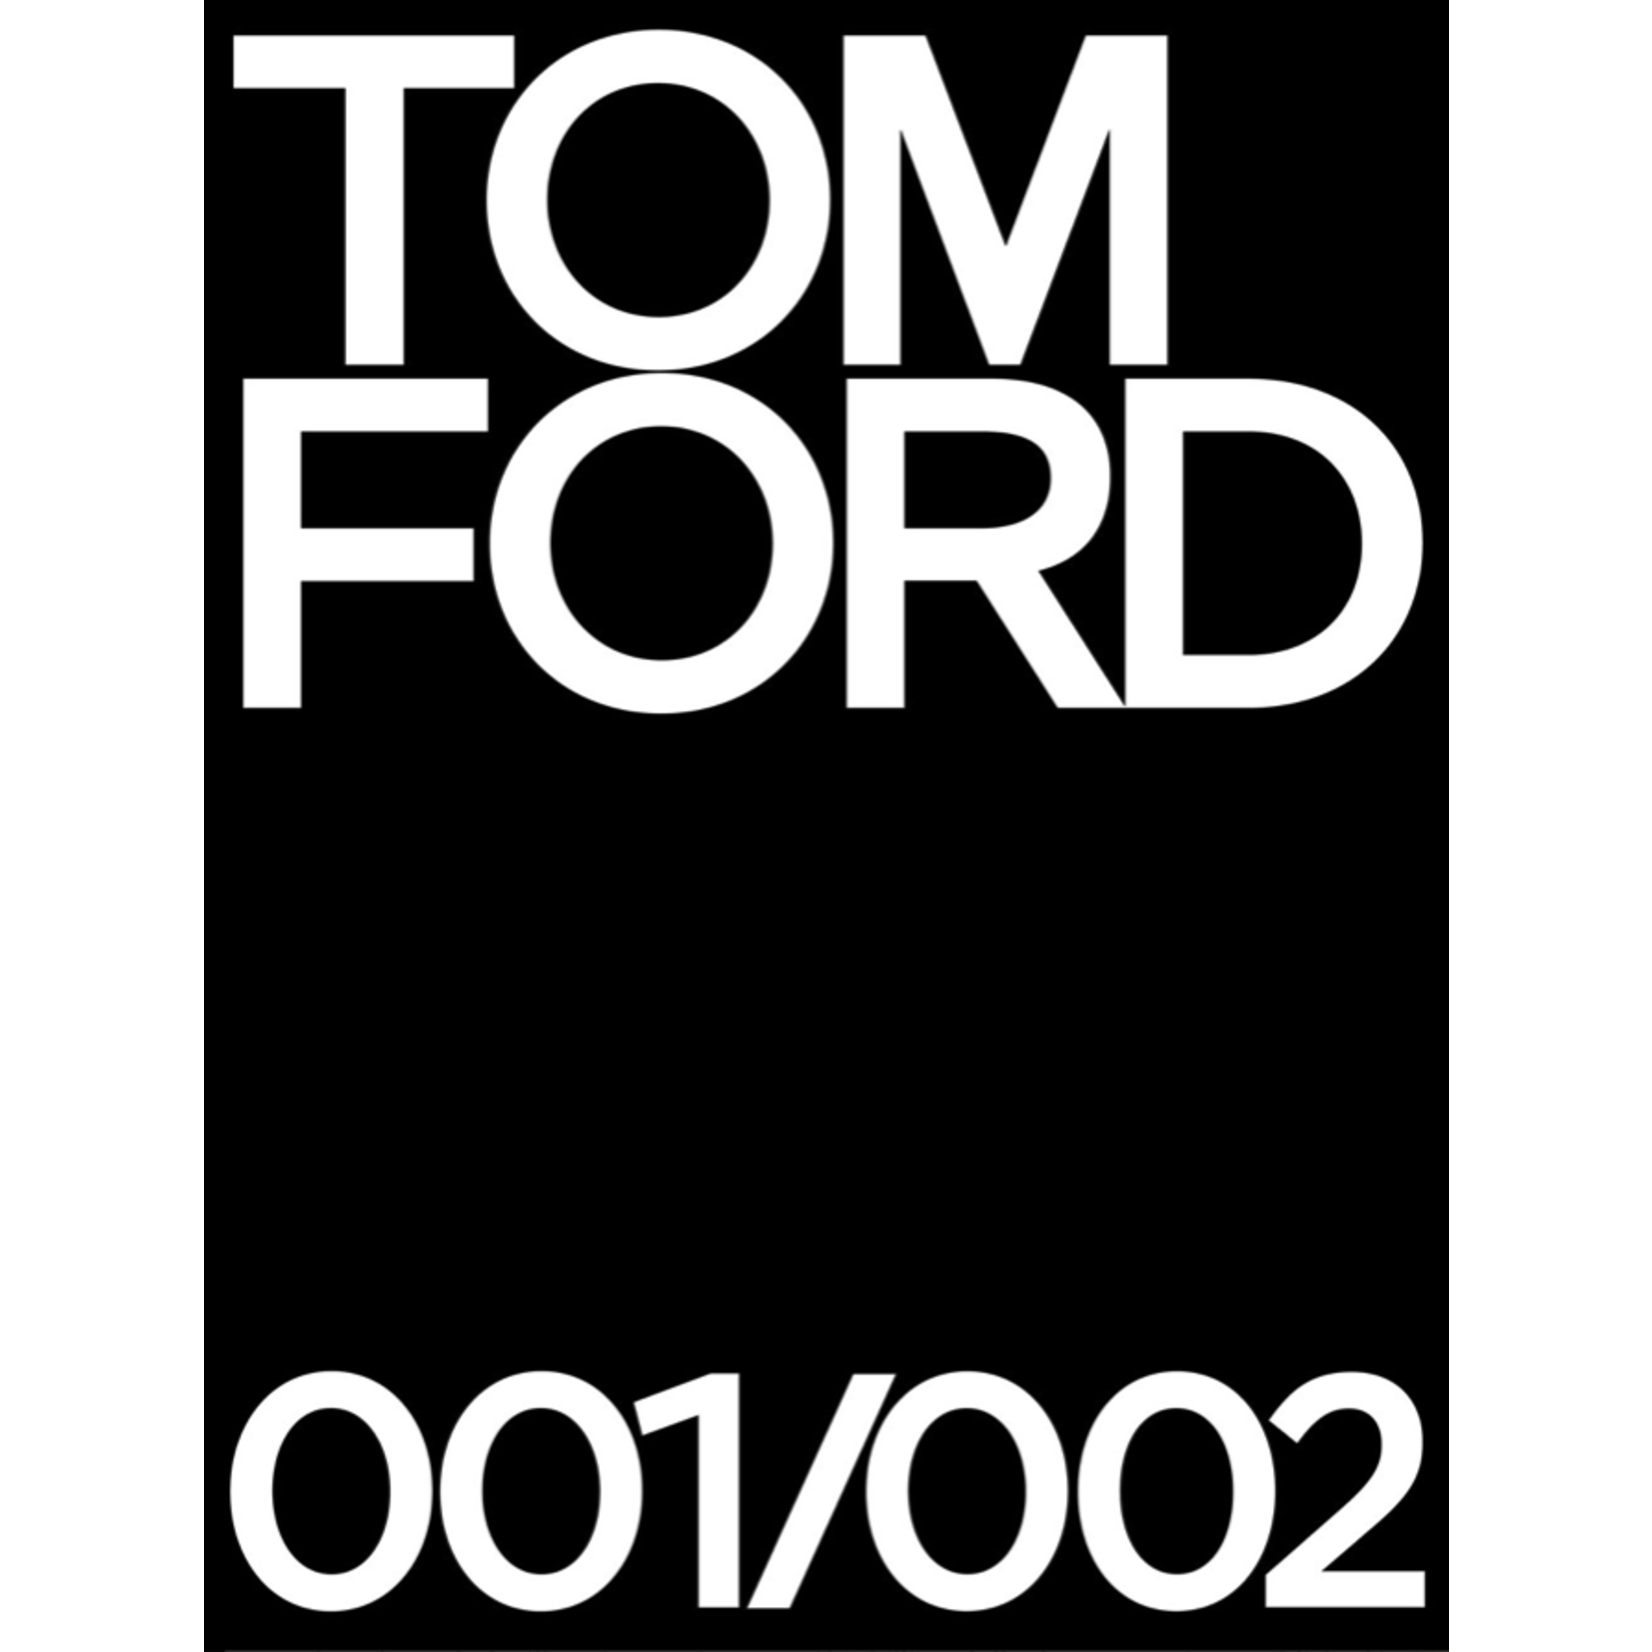 Tom Ford 002 Deluxe Hardcover Book - Outside the Box Palm Beach